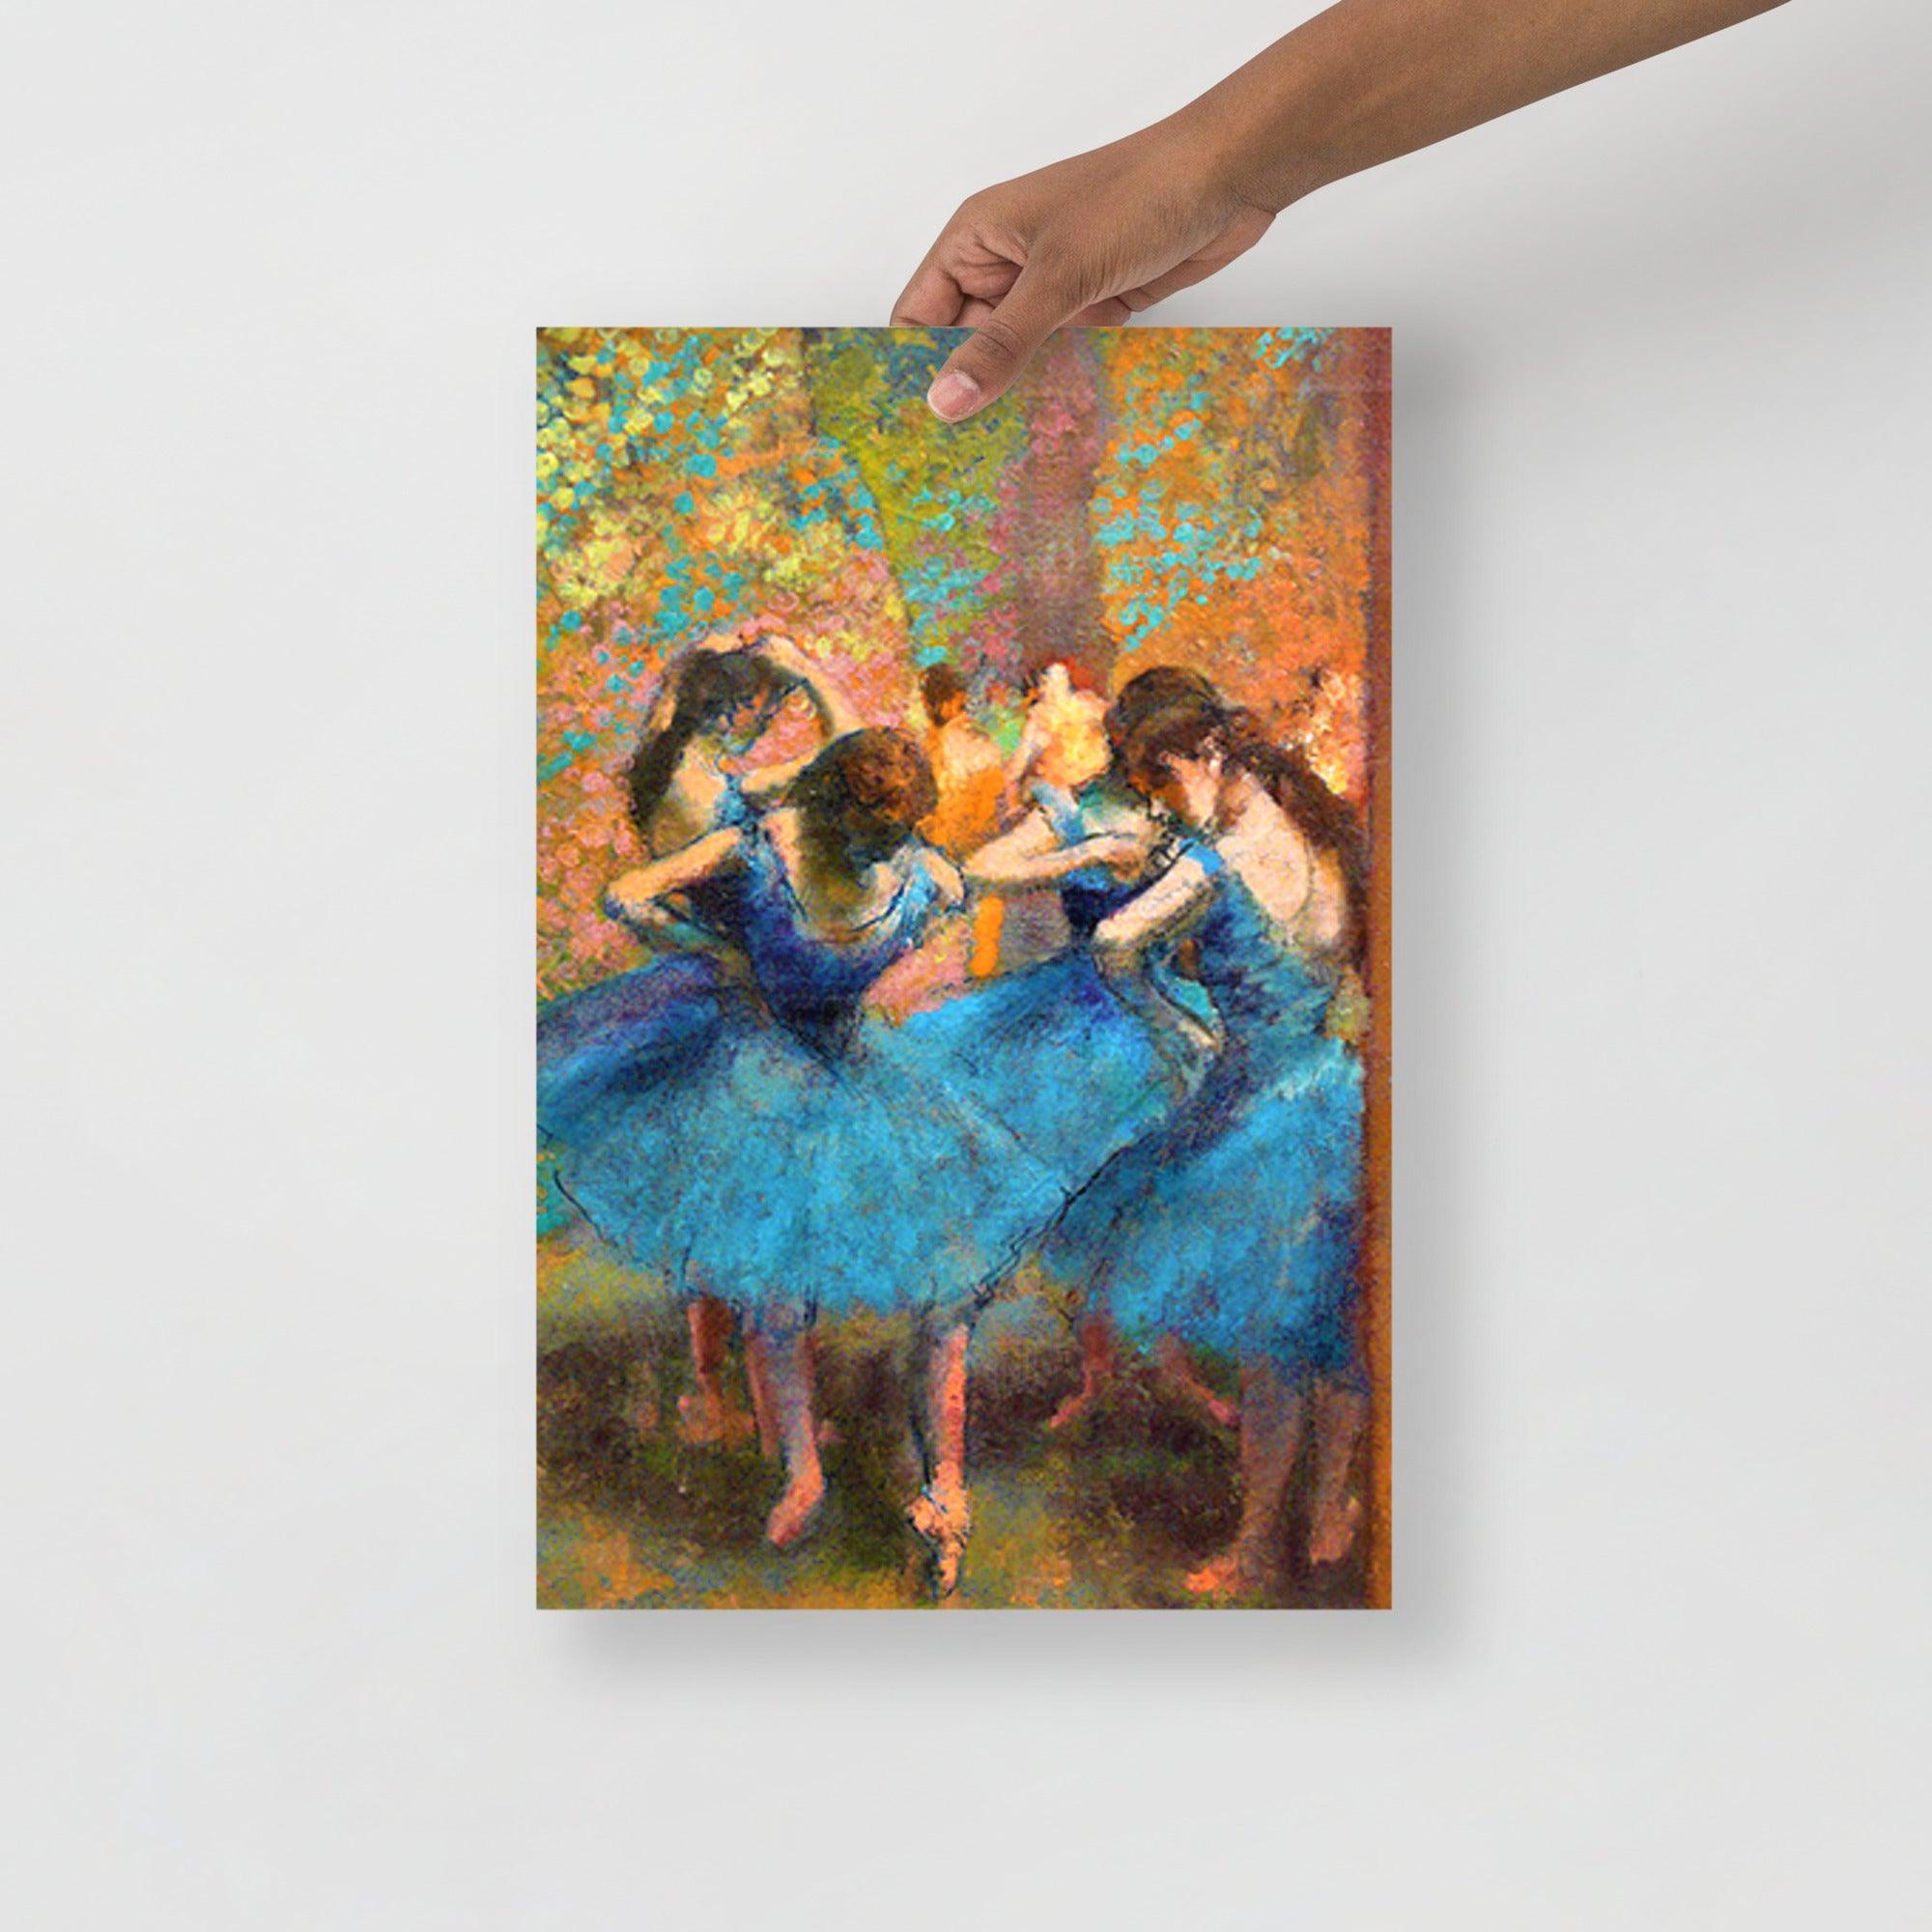 A Dancers in Blue by Edgar Degas poster on a plain backdrop in size 12x18”.